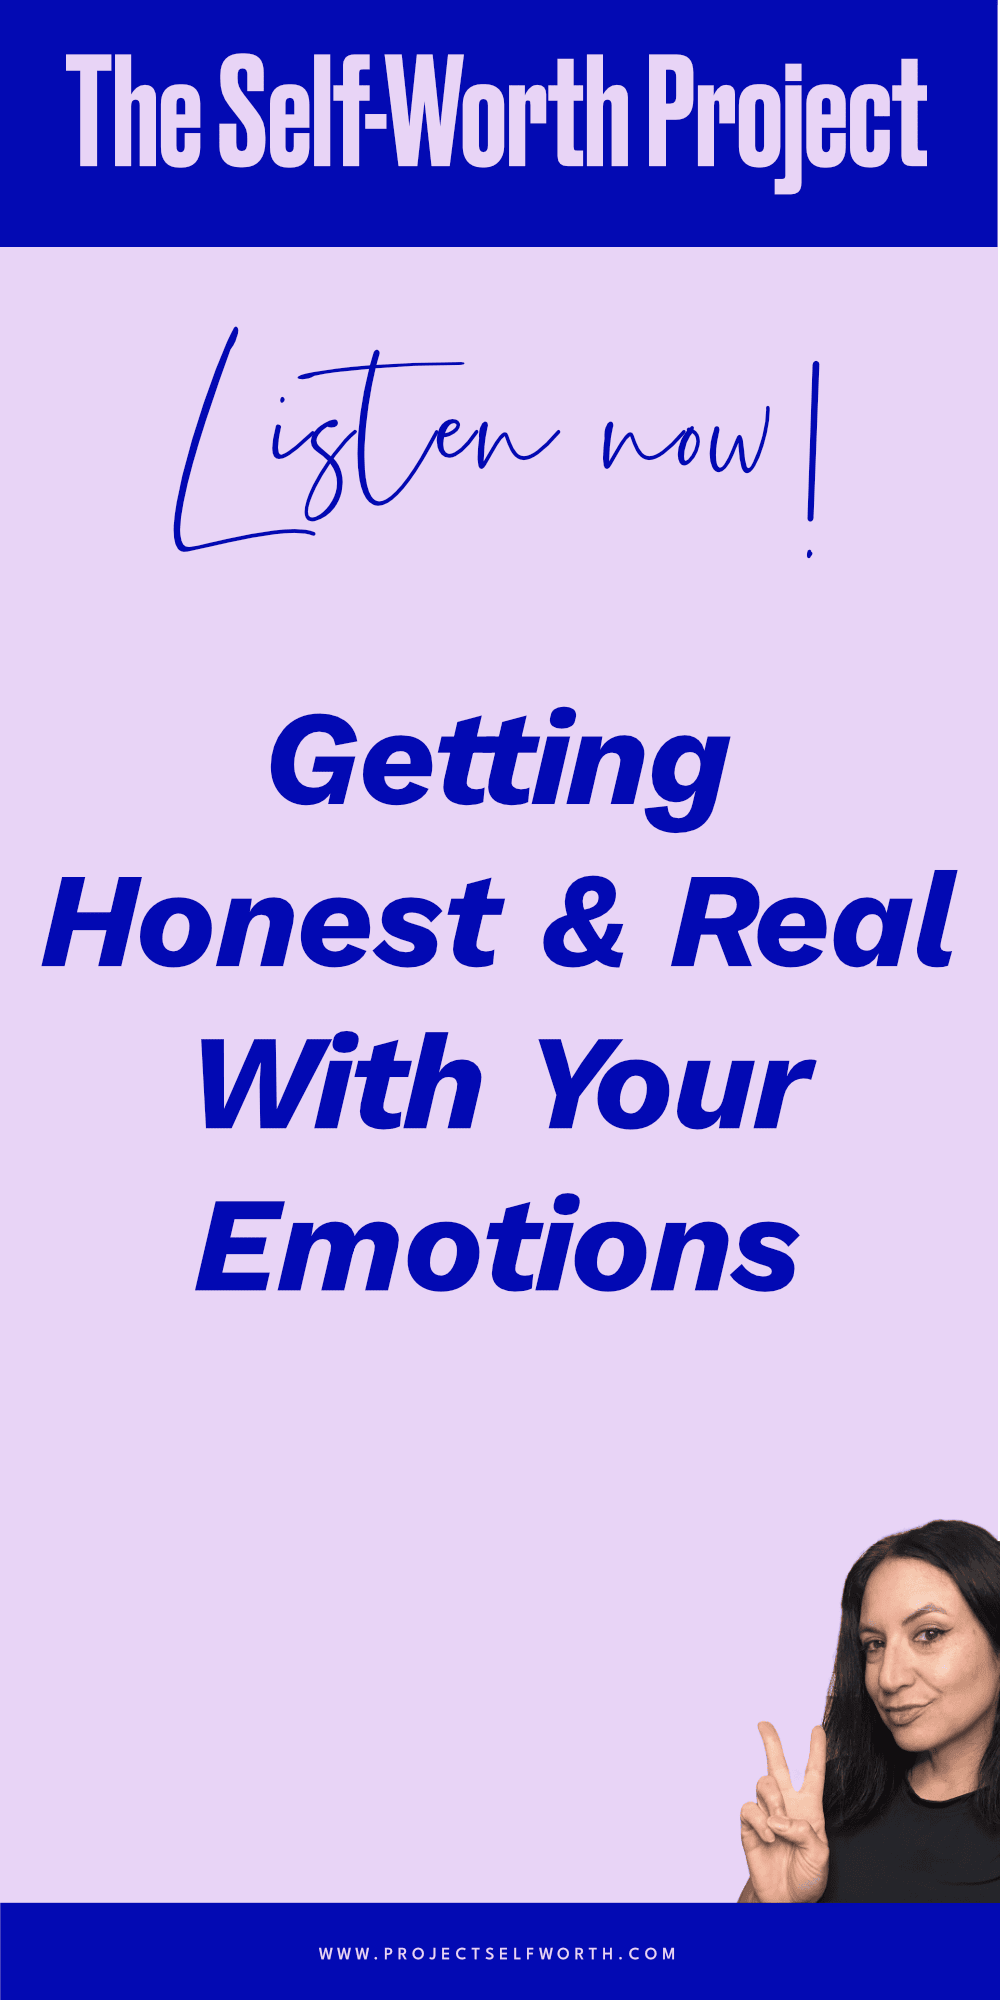 Episode #19: Getting Real & Honest With Your Emotions